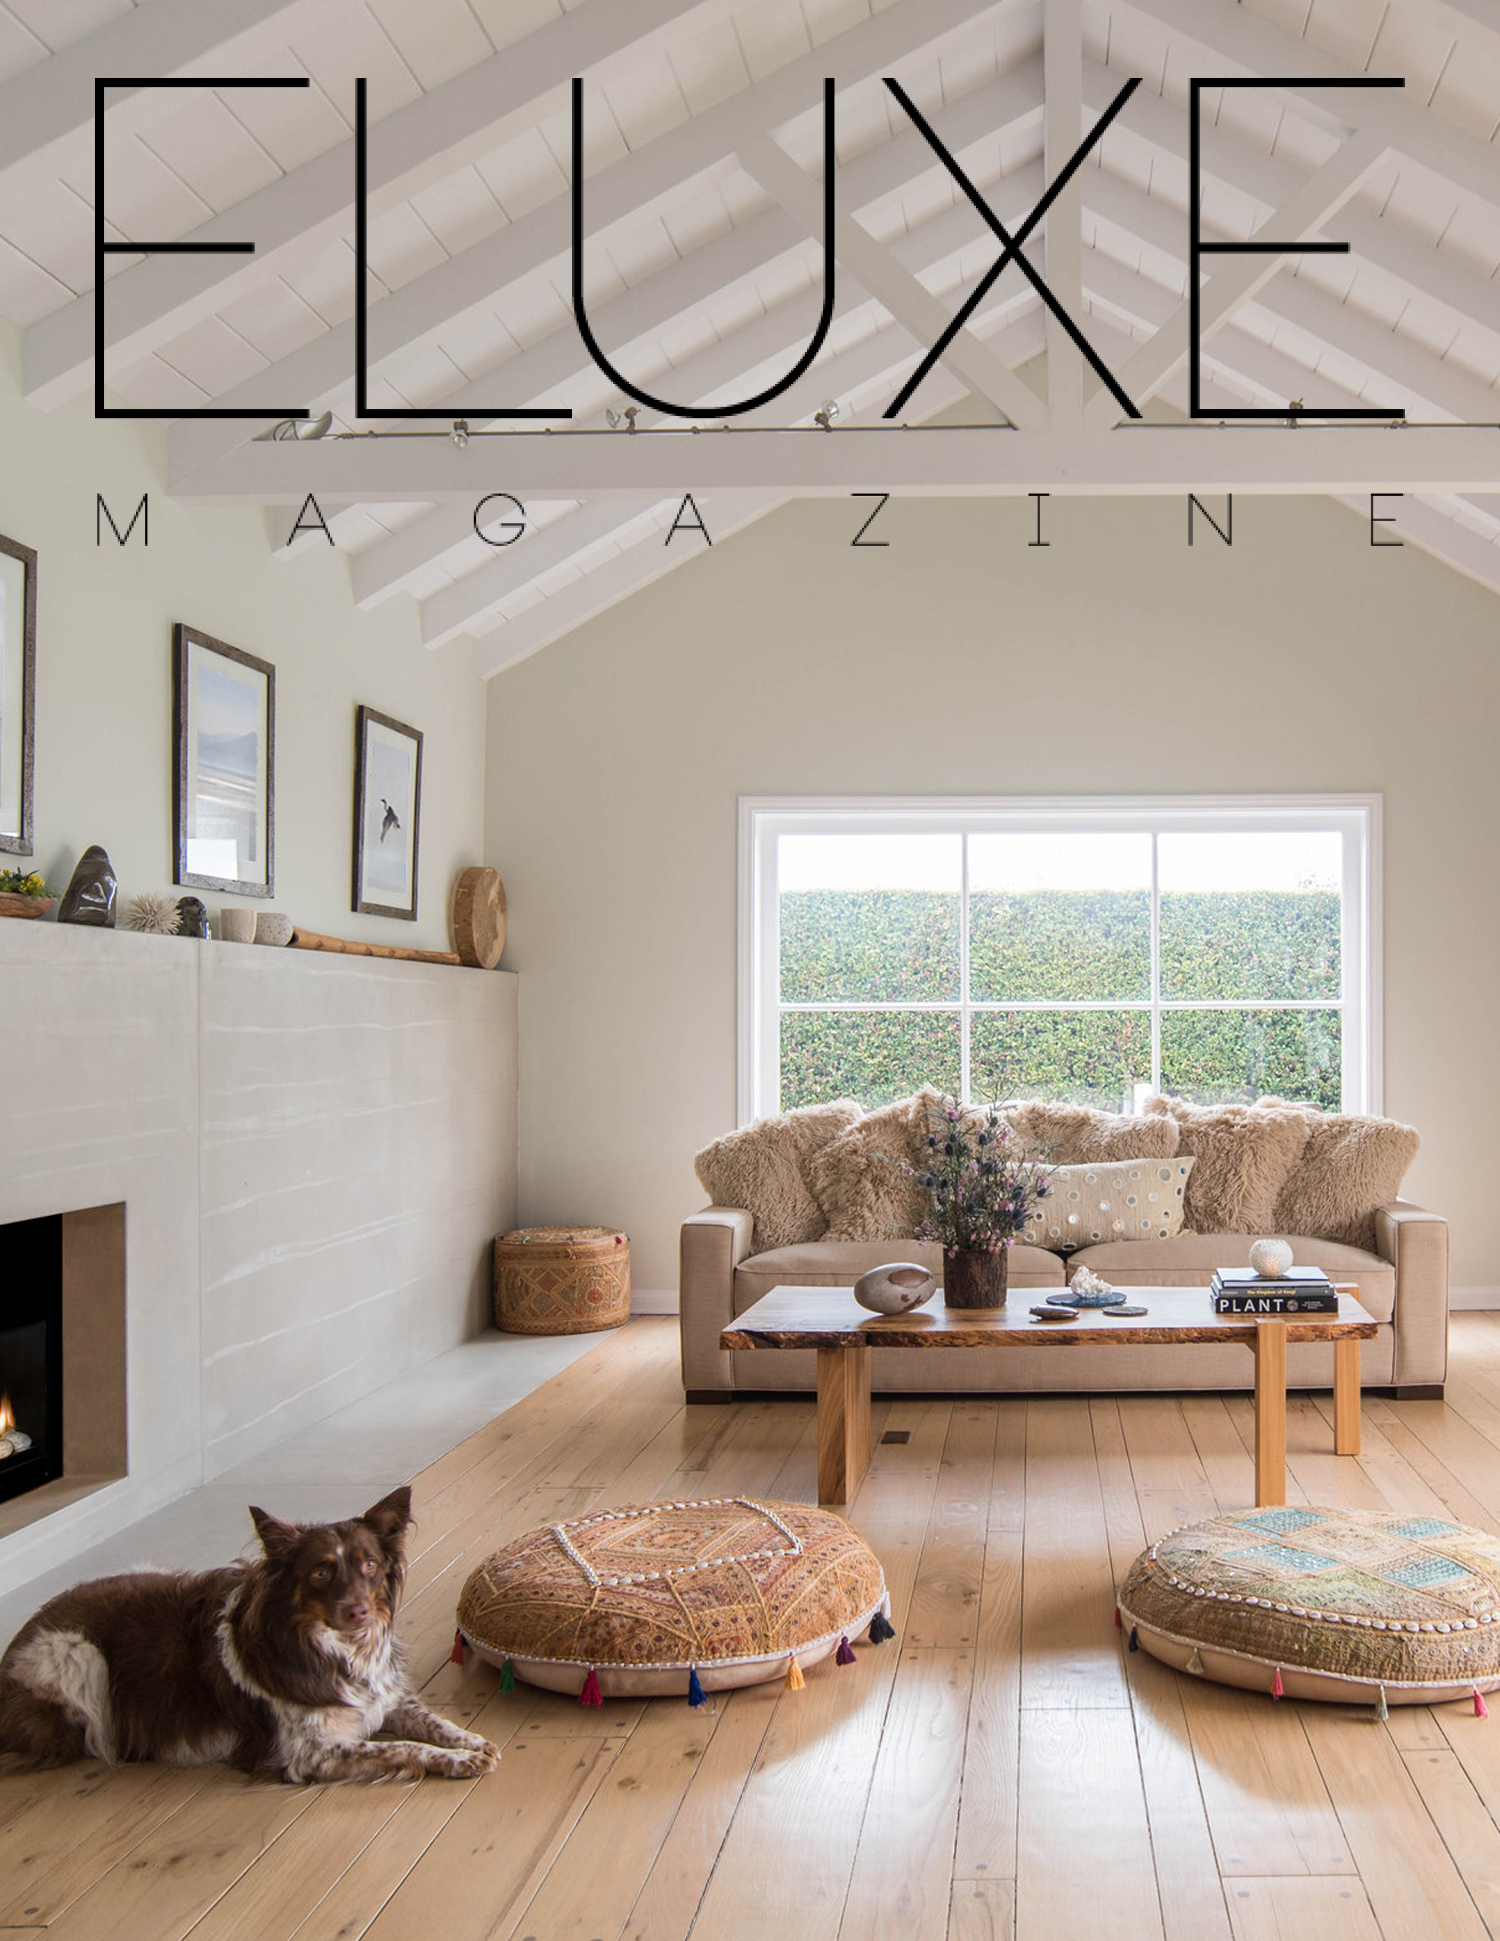  An interview with Sarah Barnard in “Eluxe Magazine” where Sarah discusses a peaceful, coastal design project.  